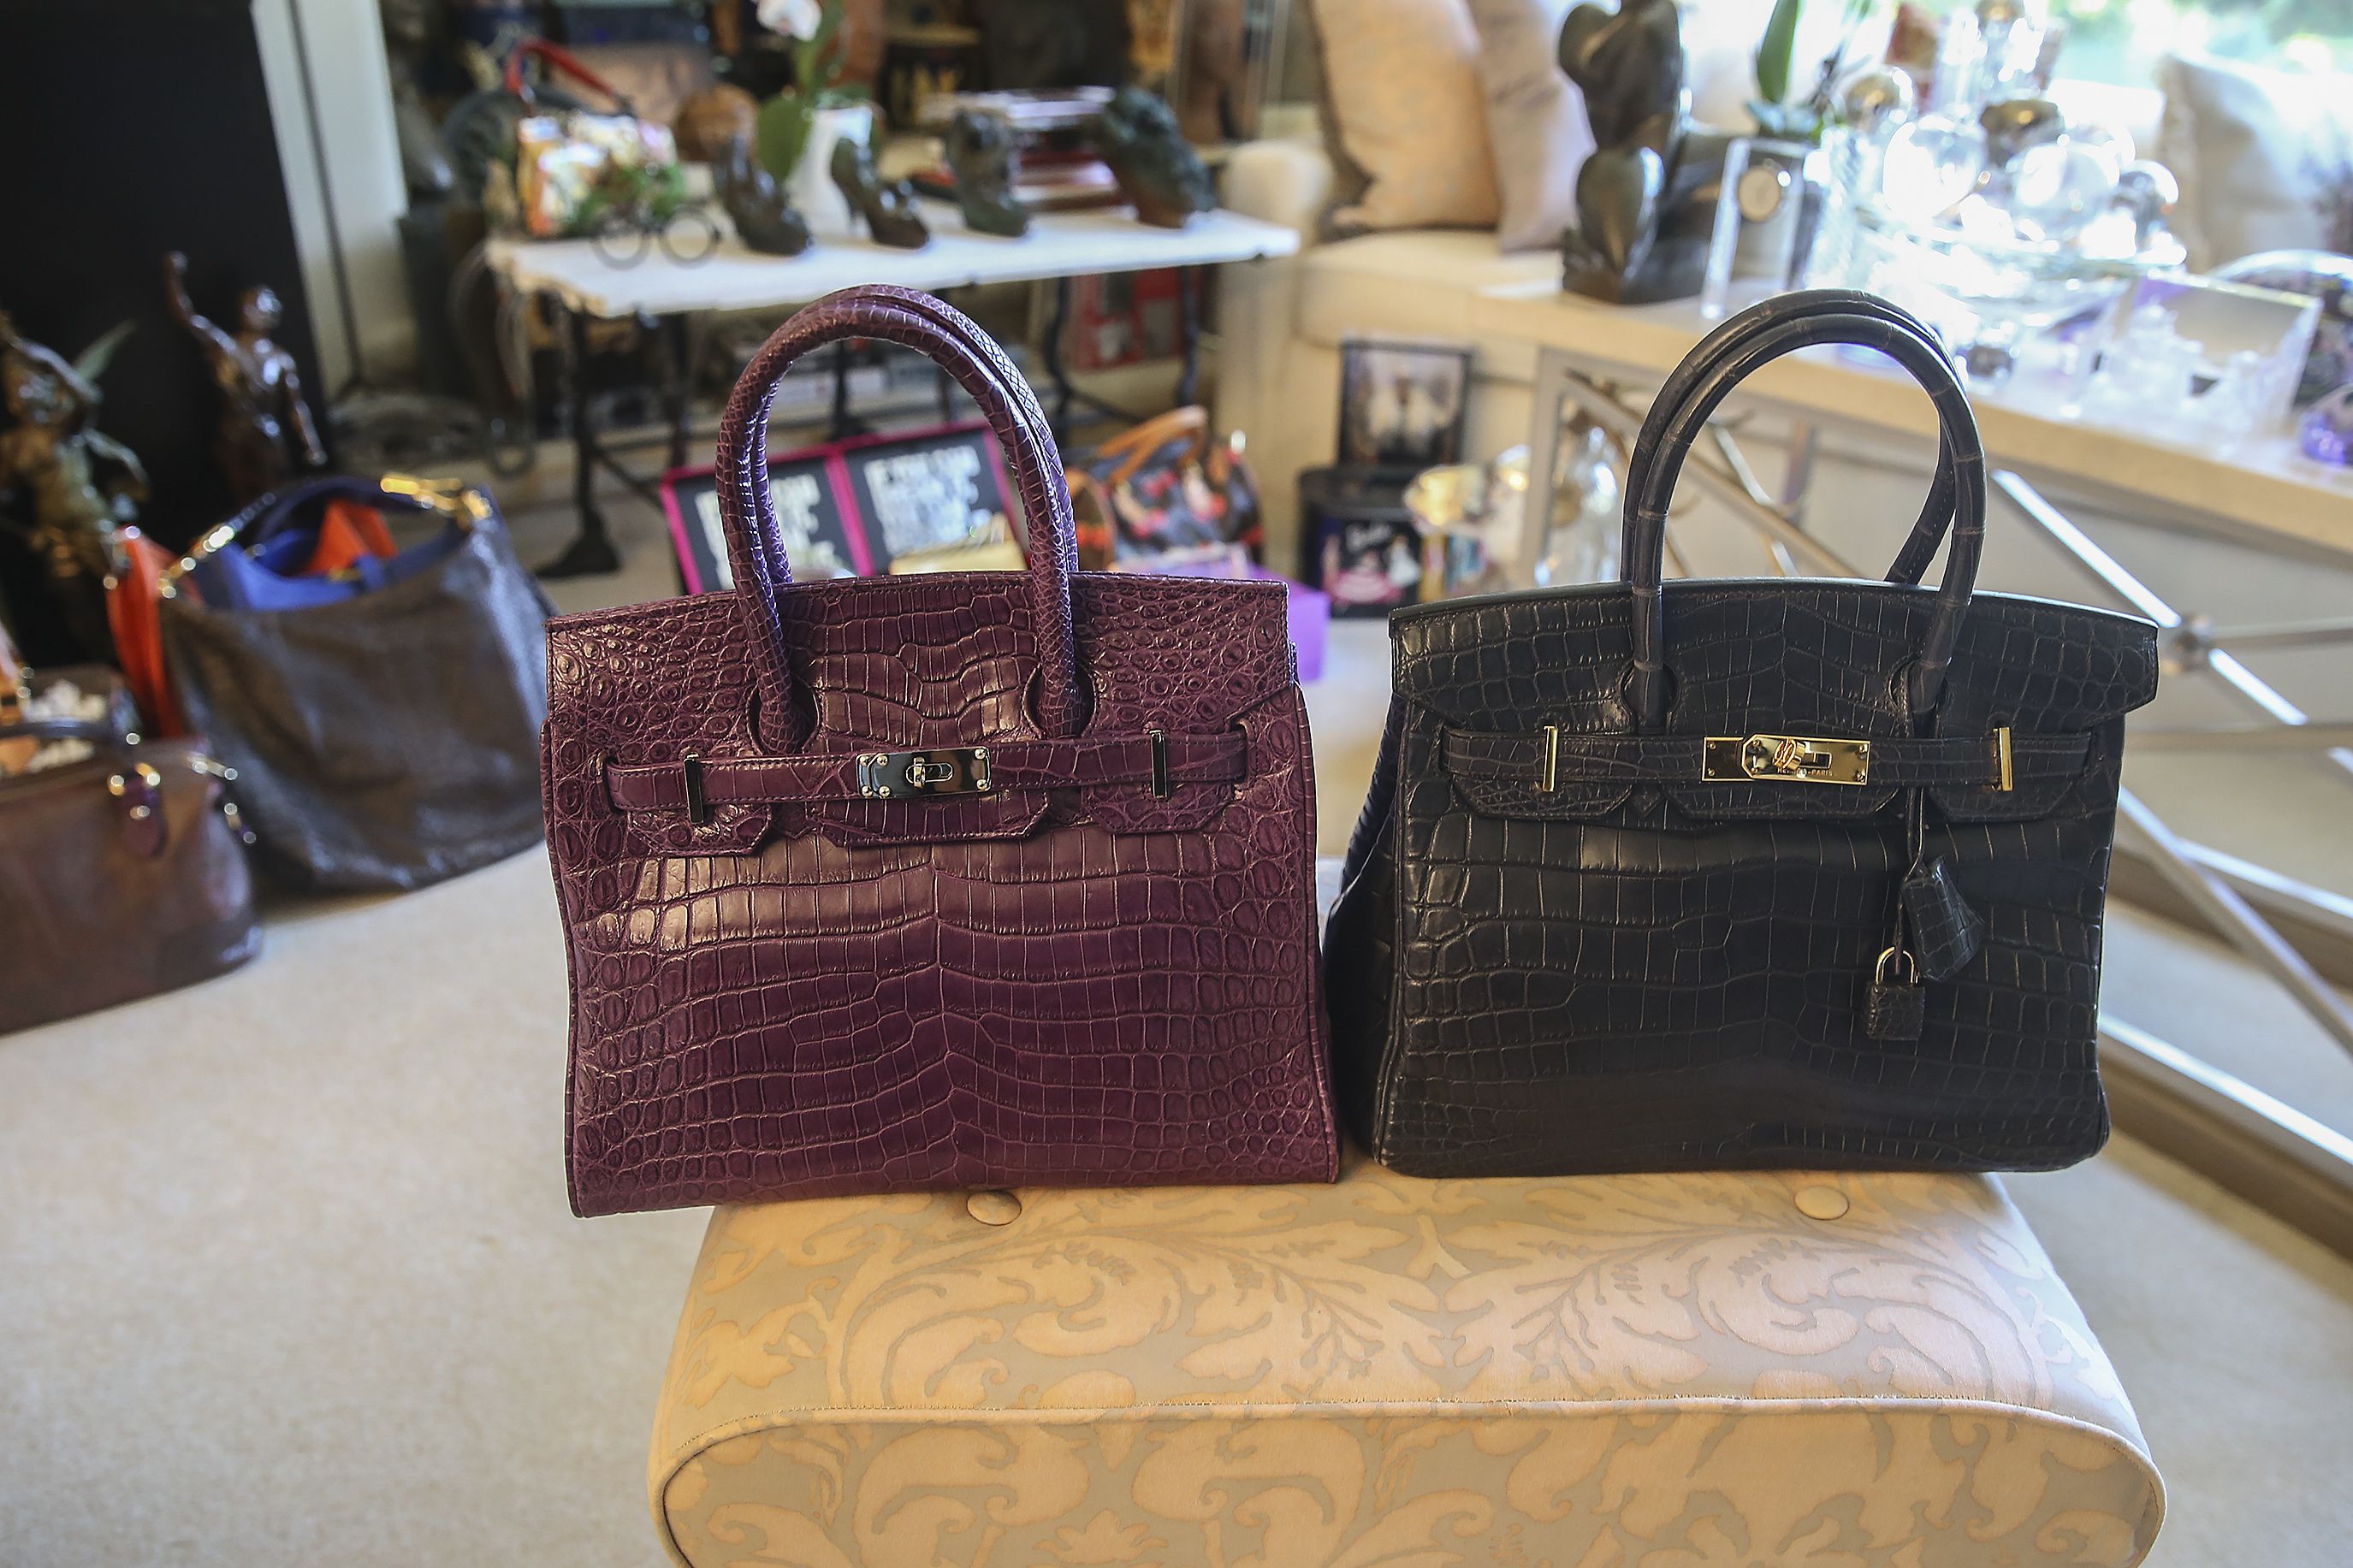 This Pa. woman owns 3,000 handbags, and she keeps them in an army